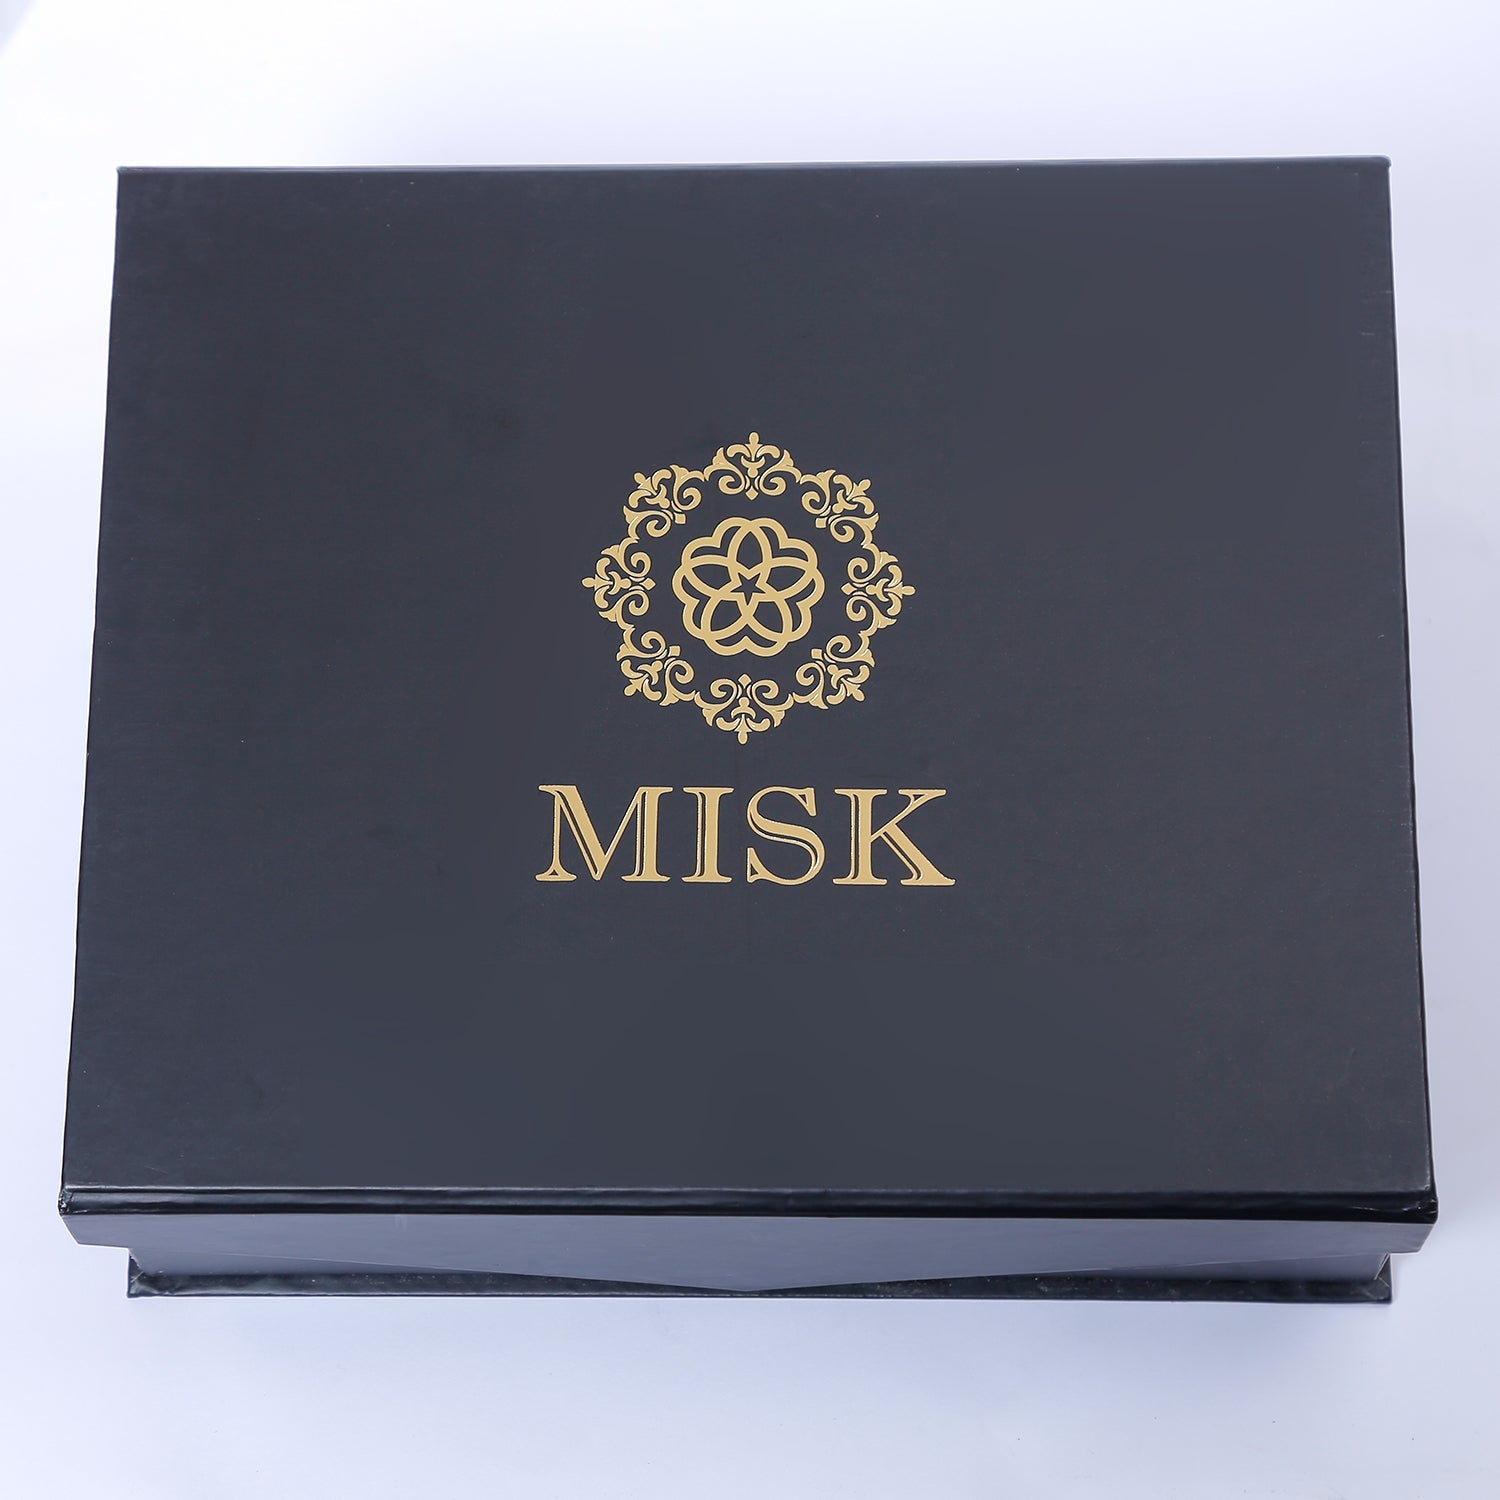 Black Musk Box from Misk Doha